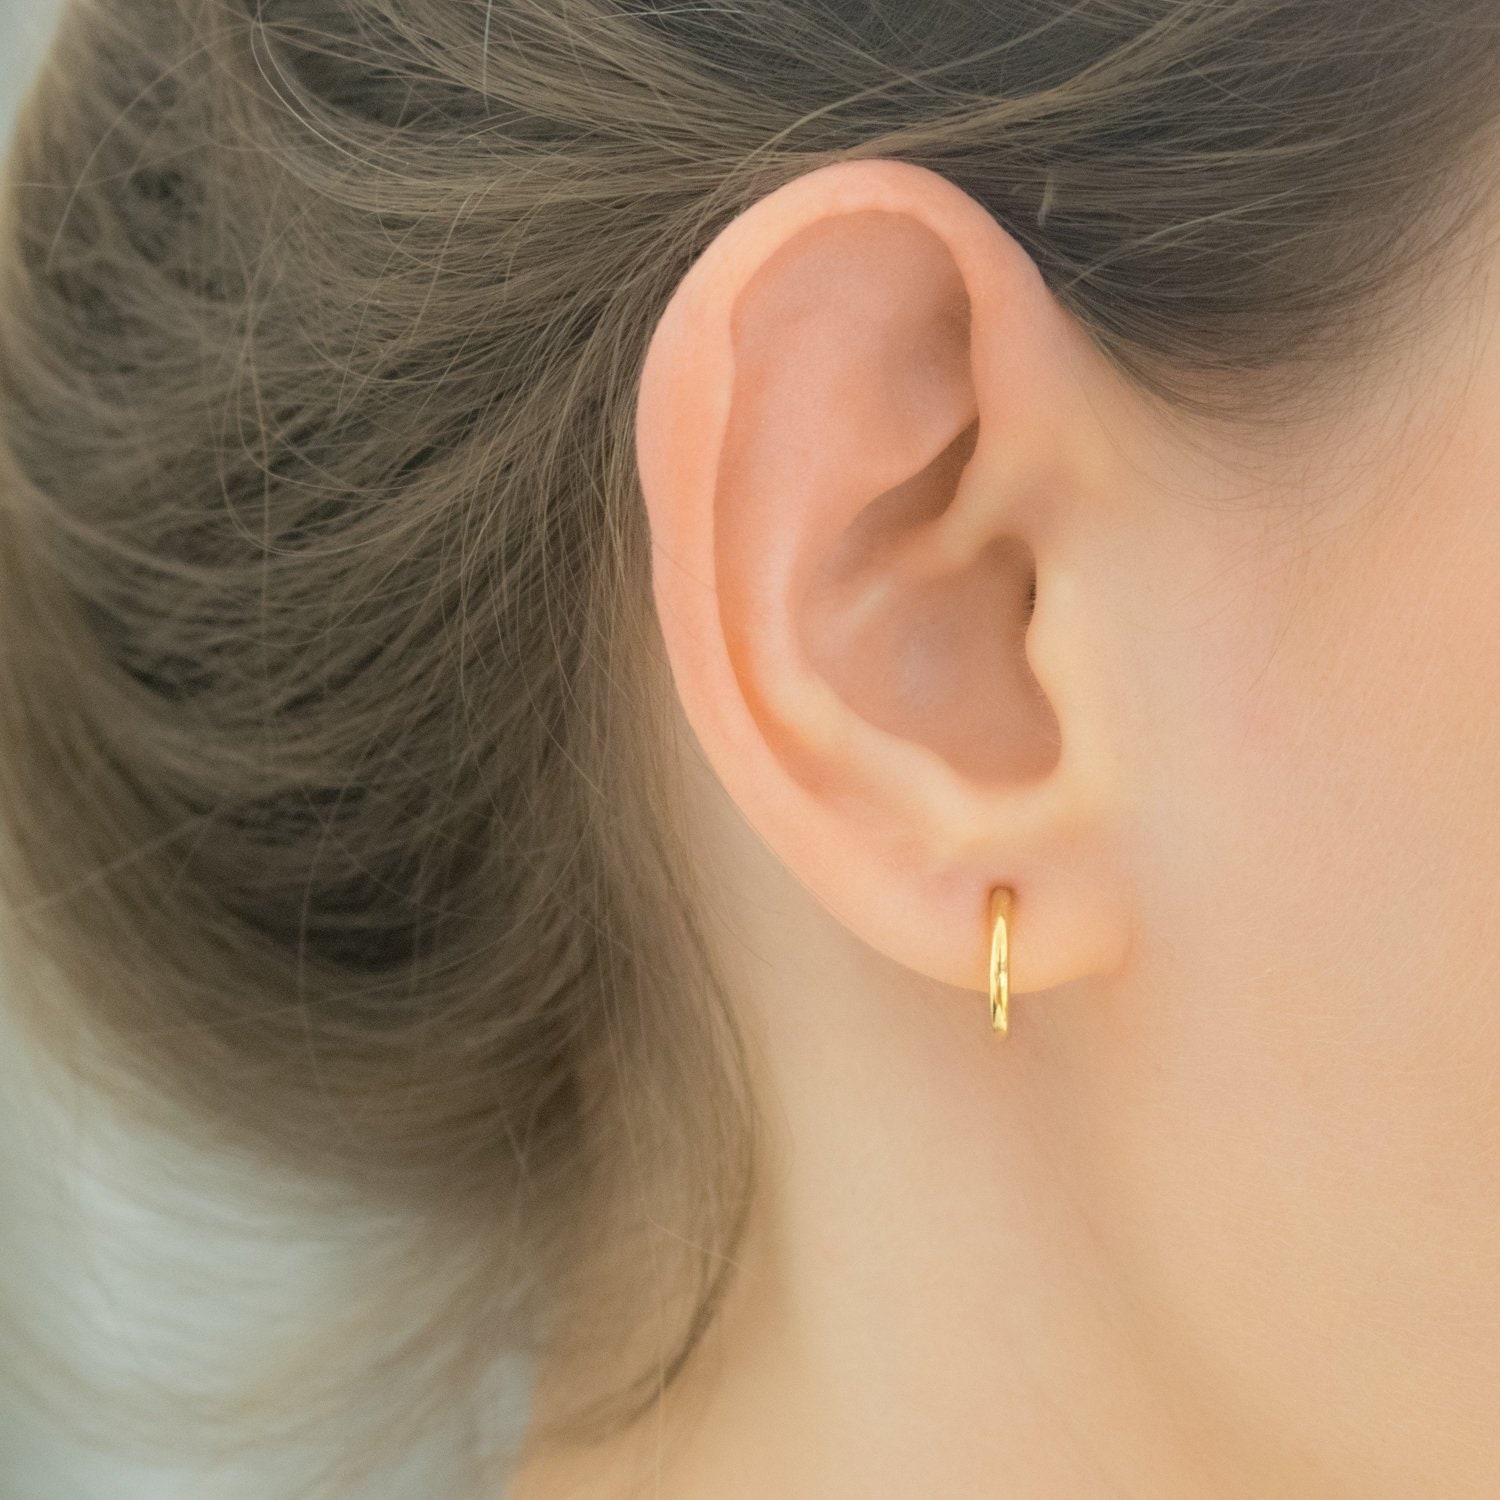 6 cool as hell earrings for non-pierced ears | The FADER